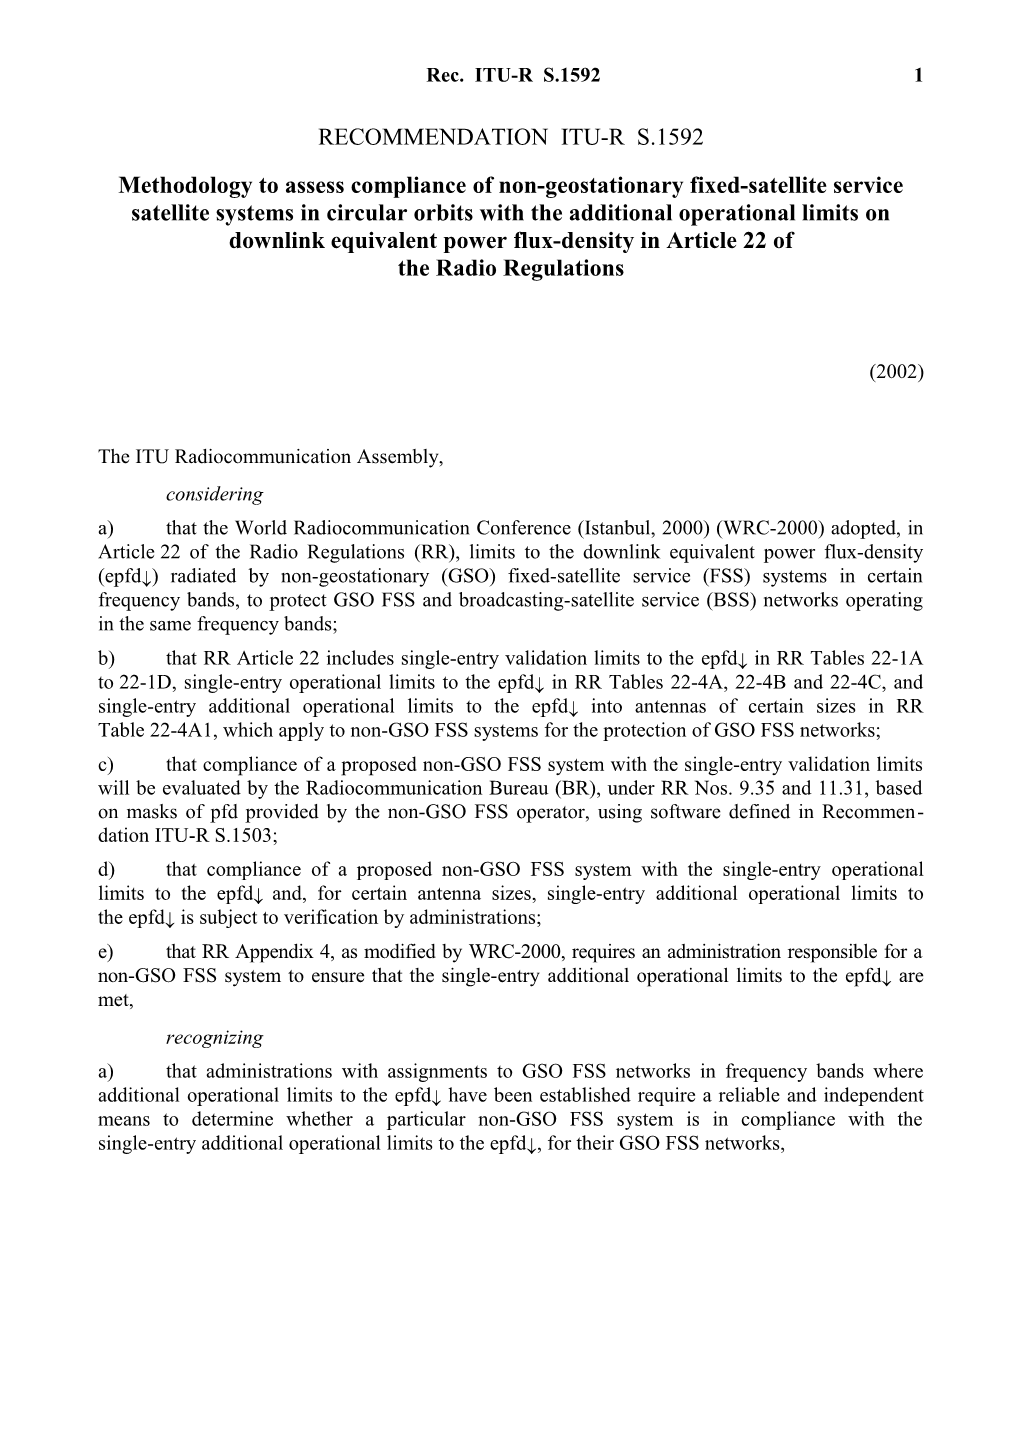 RECOMMENDATION ITU-R S.1592 - Methodology to Assess Compliance of Non-Geostationary